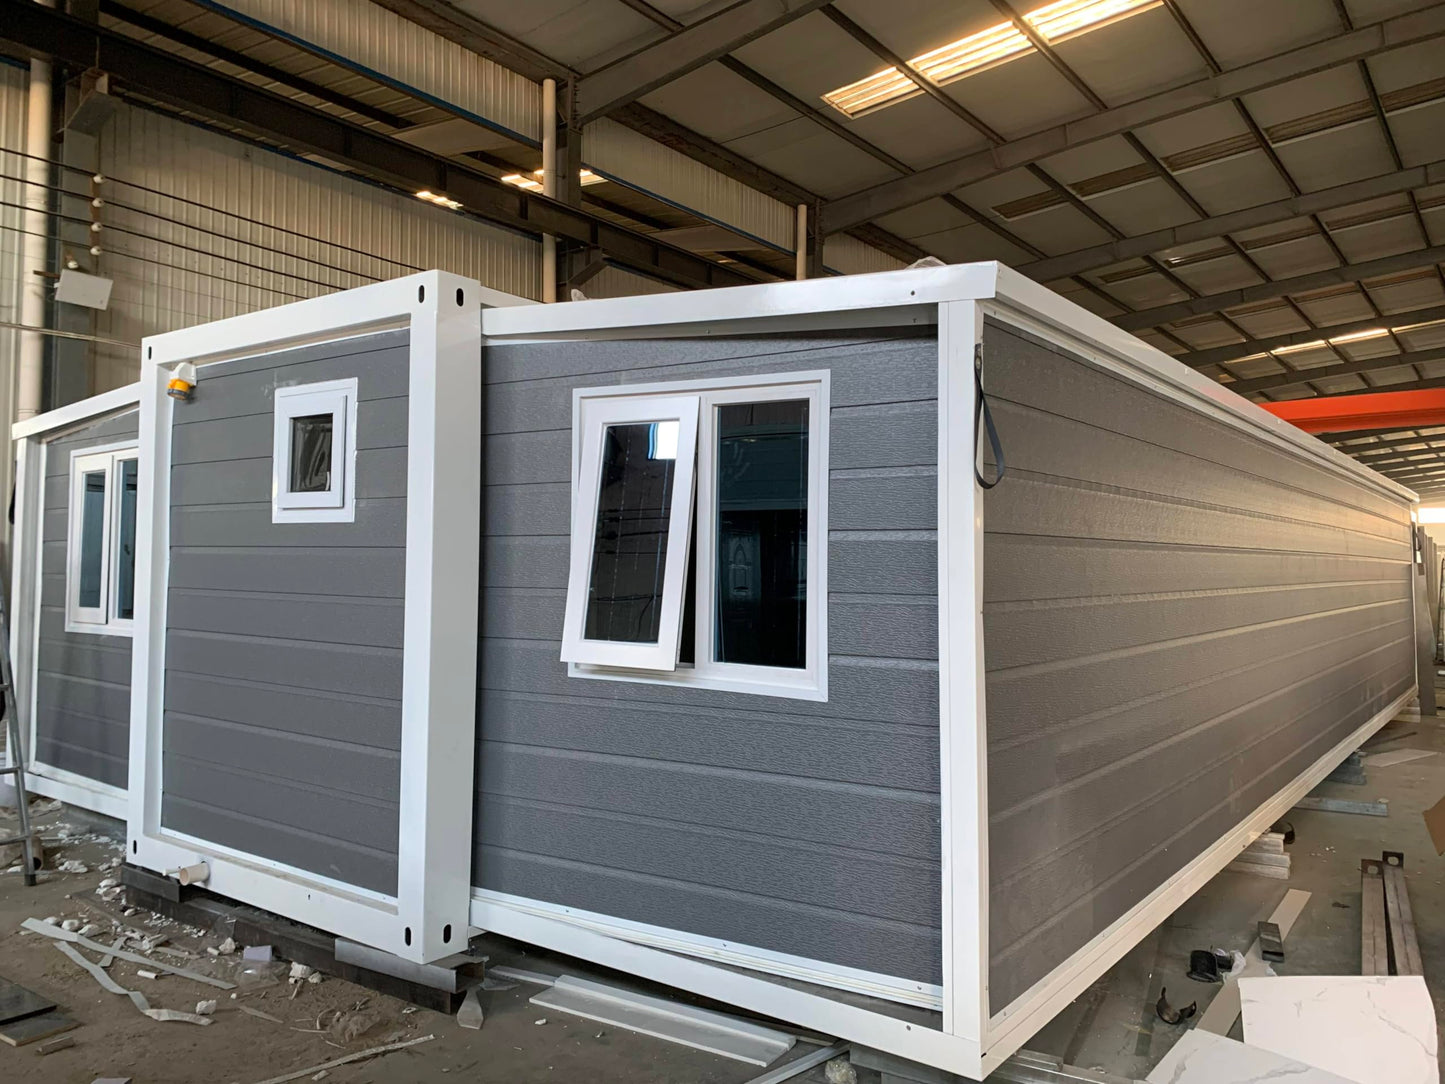 Portable Prefab Tiny Home: Starting from 20 x 20 ft Mobile Expandable House for Versatile Use, Including Hotel, Office, Shop, and More, with Restroom Included (20x40 (Kitchen/Restroom Included)